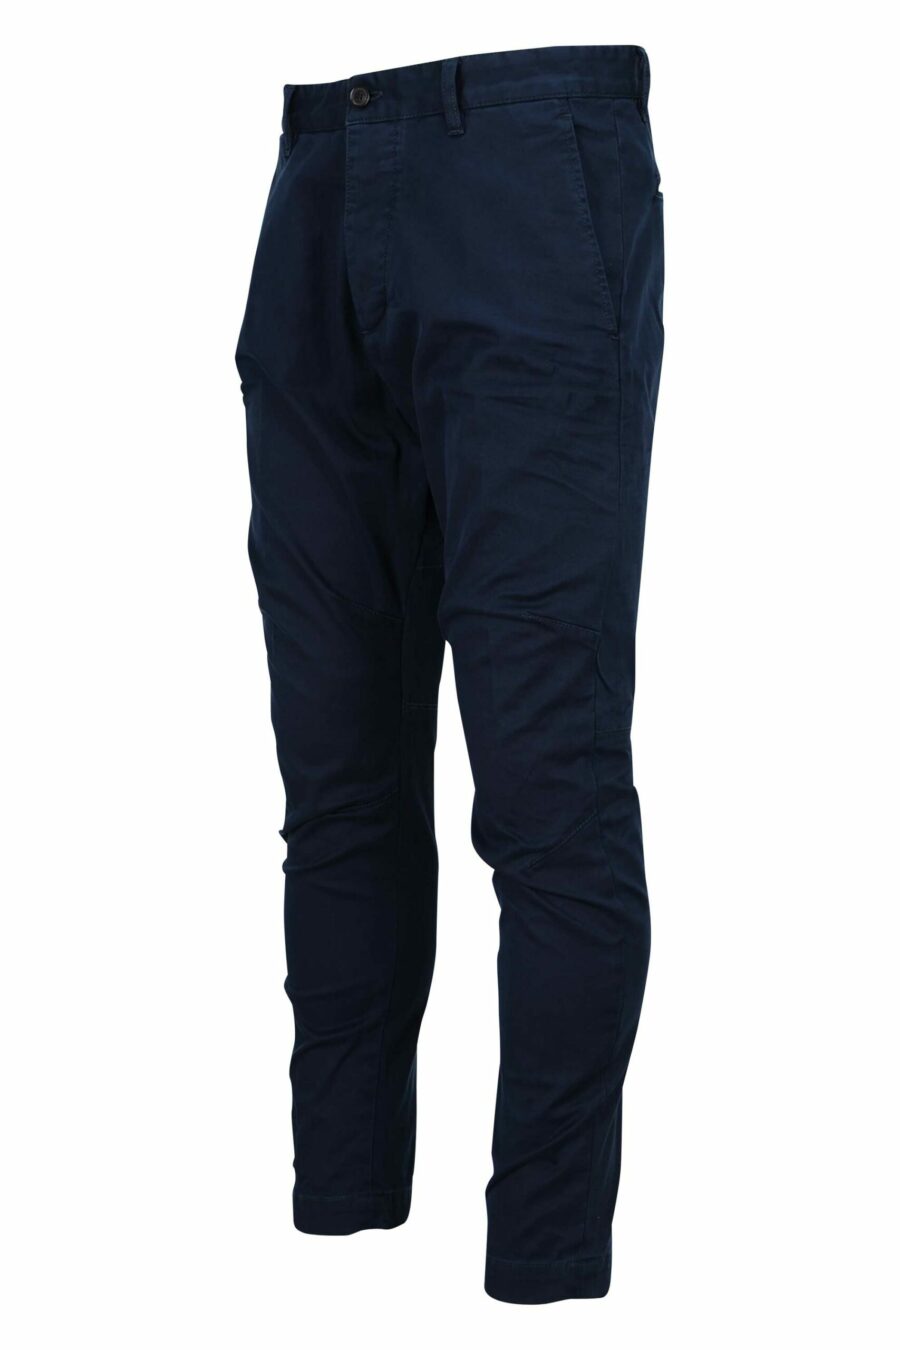 Sexy chino trousers dark blue - 8052134973431 1 scaled